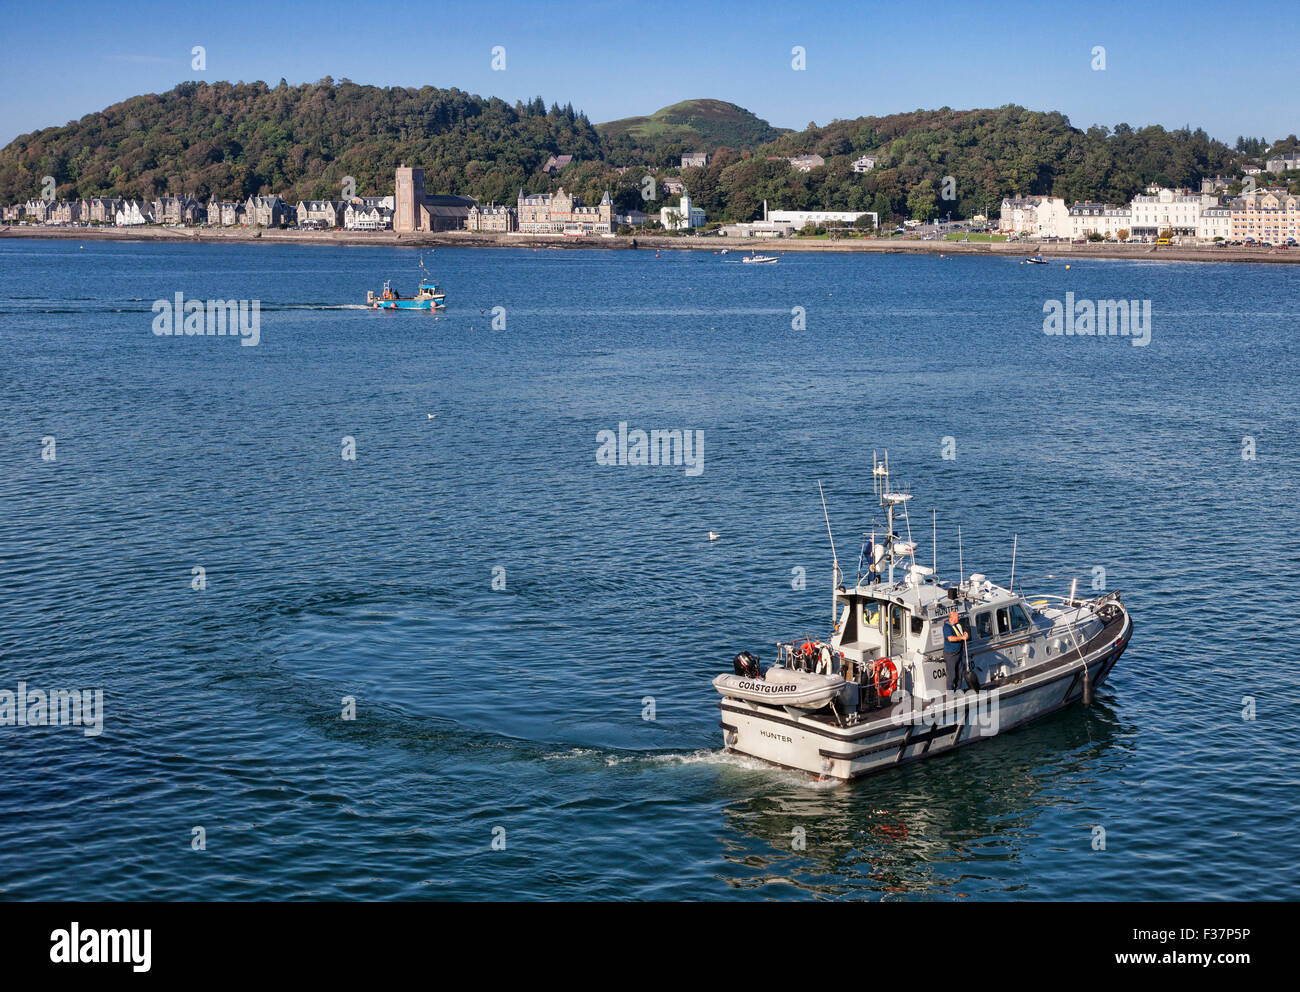 Coastguard cutter 'Hunter' in the harbour at Oban, Argyll and Bute, Scotland, UK. Stock Photo